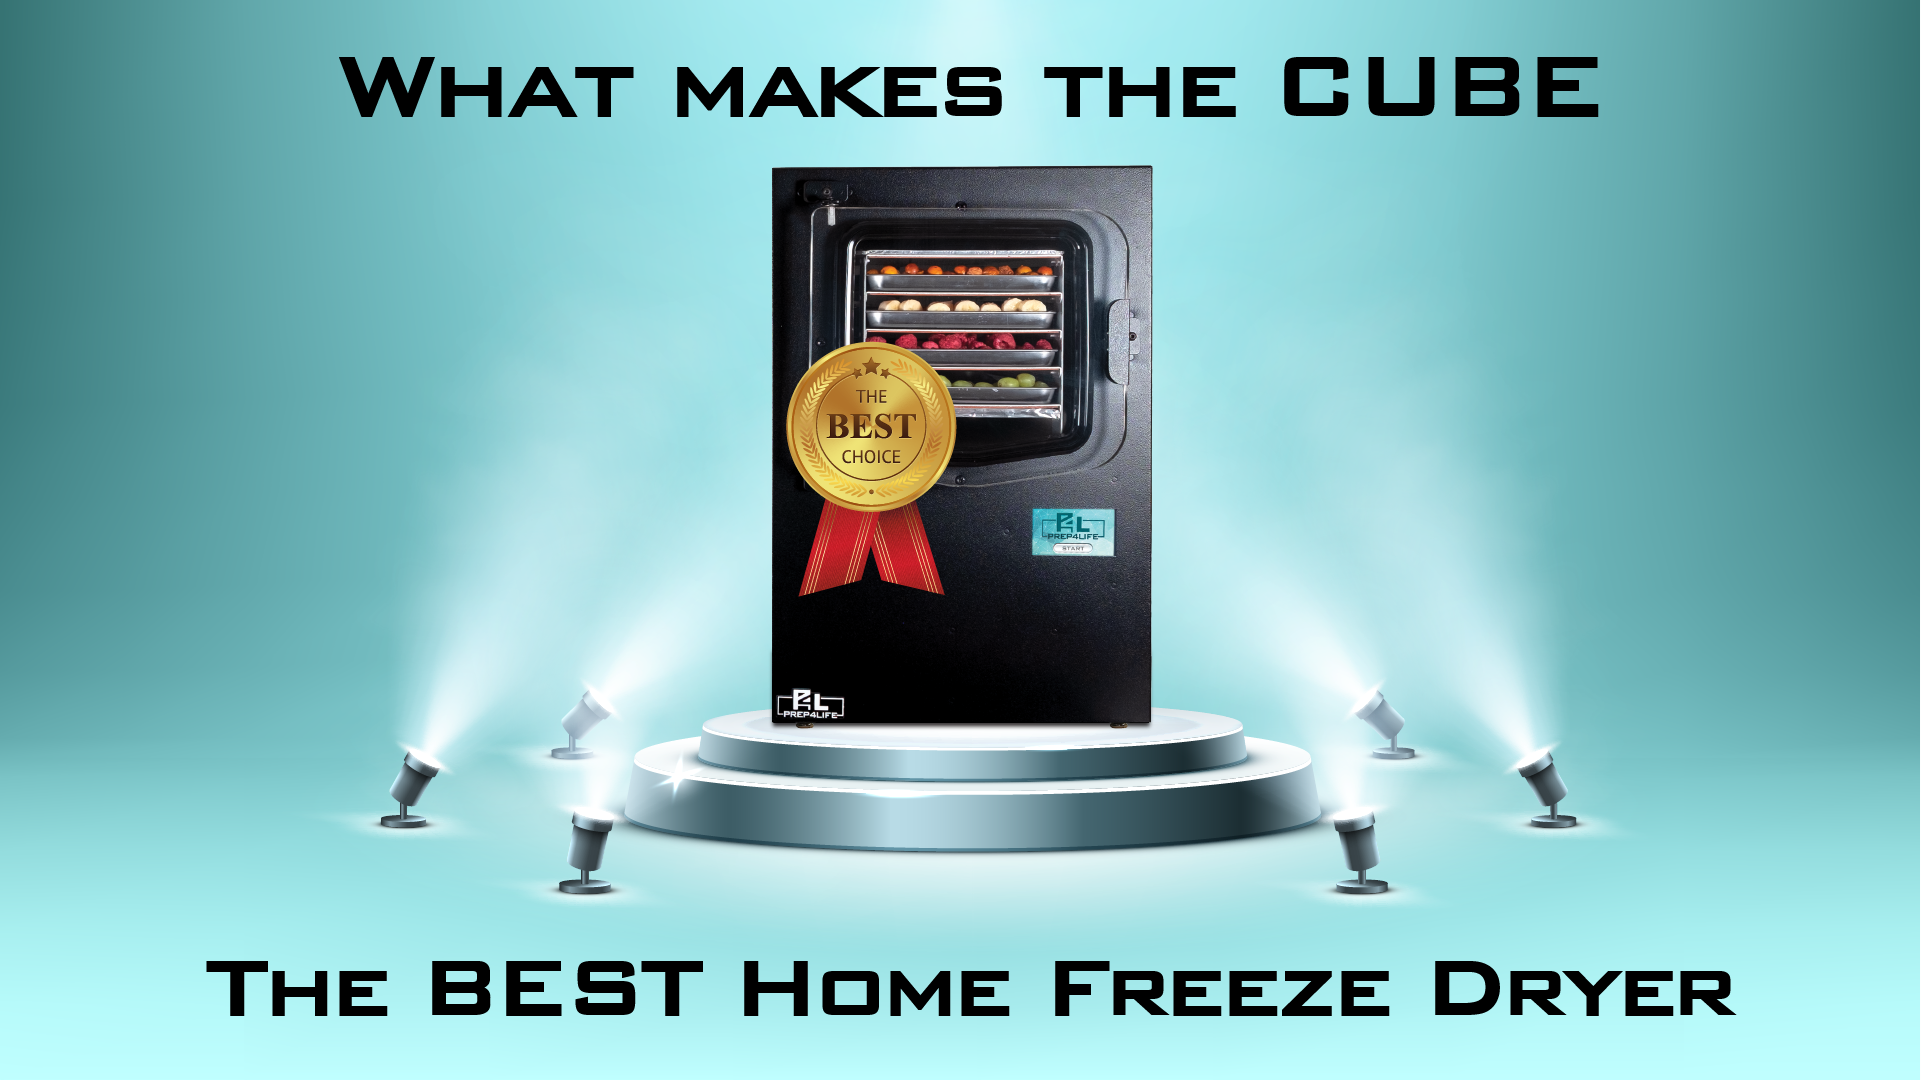 Load video: Cube Best Home Freeze Dryer